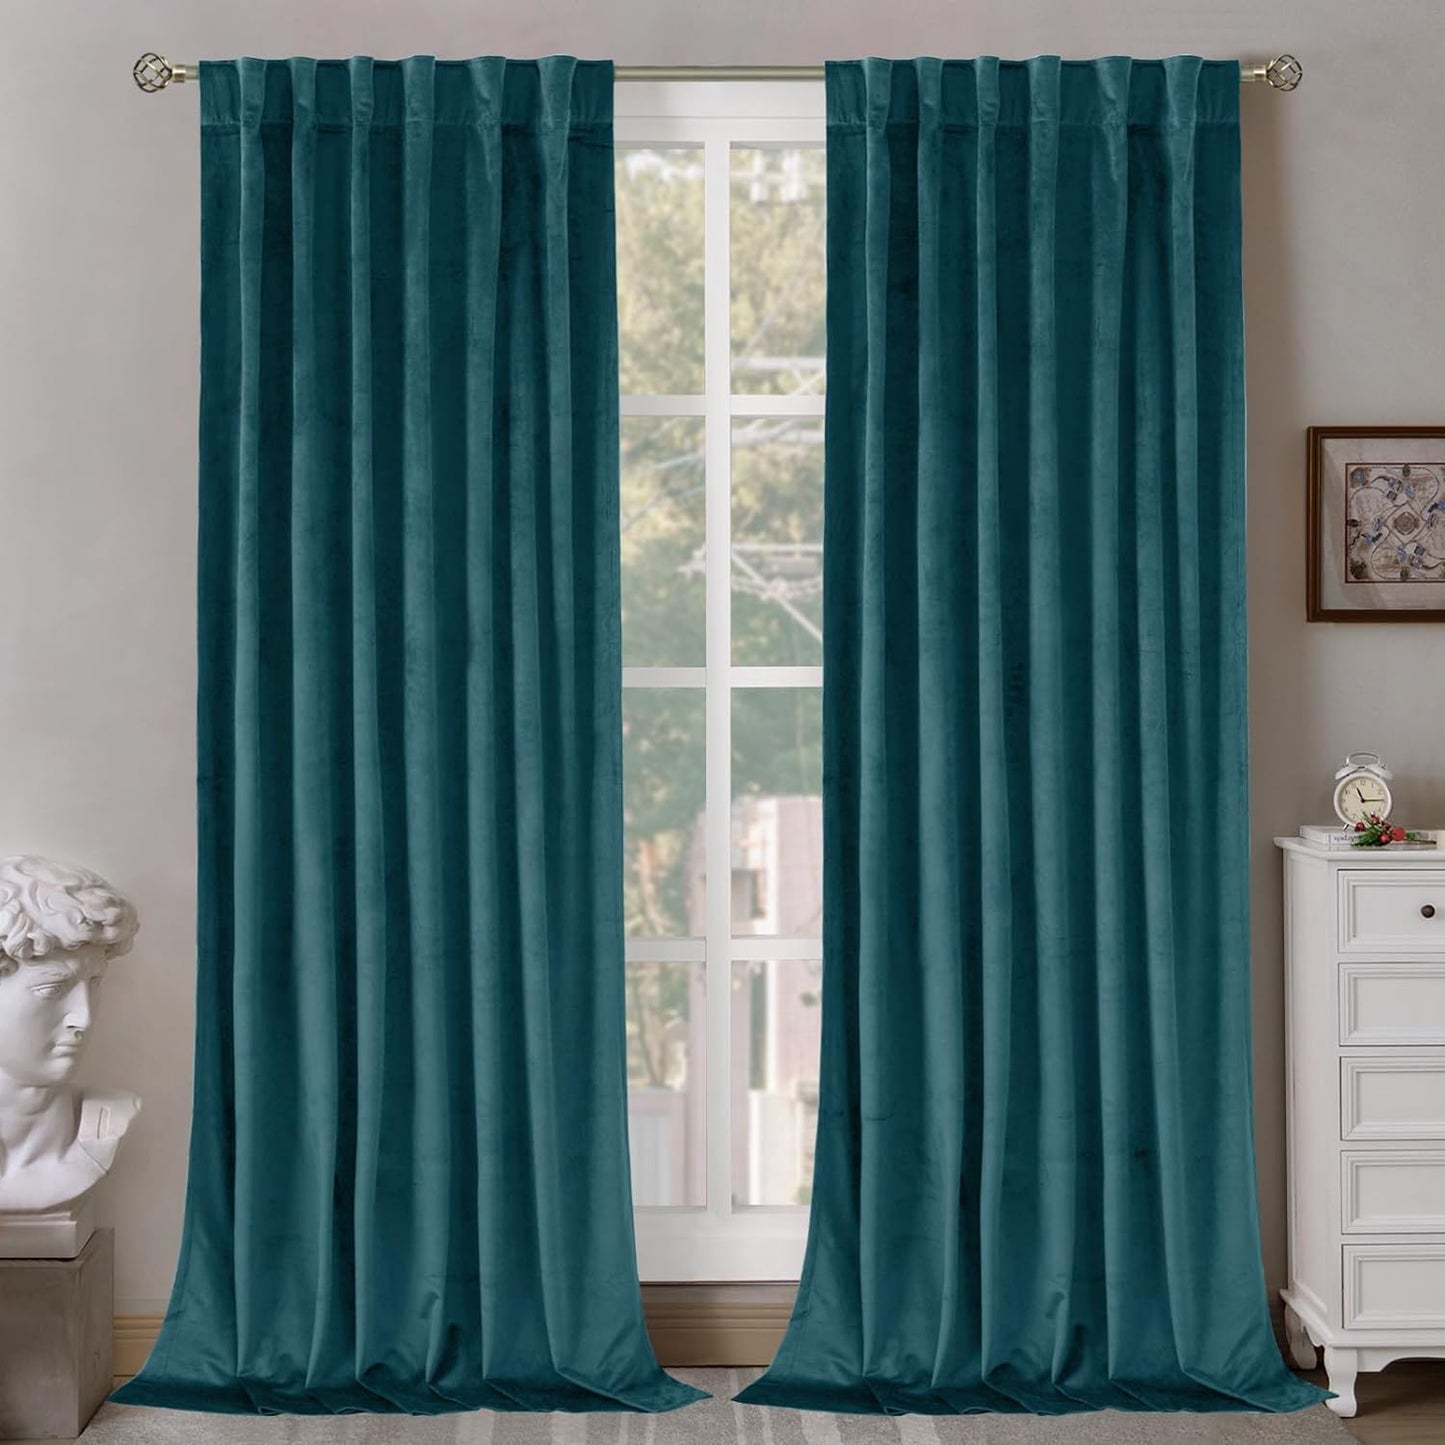 Bgment Grey Velvet Curtains 108 Inches Long for Living Room, Thermal Insulated Room Darkening Curtains Drapes Window Treatment with Back Tab and Rod Pocket, Set of 2 Panels, 52 X 108 Inch  BGment Teal 52W X 120L 